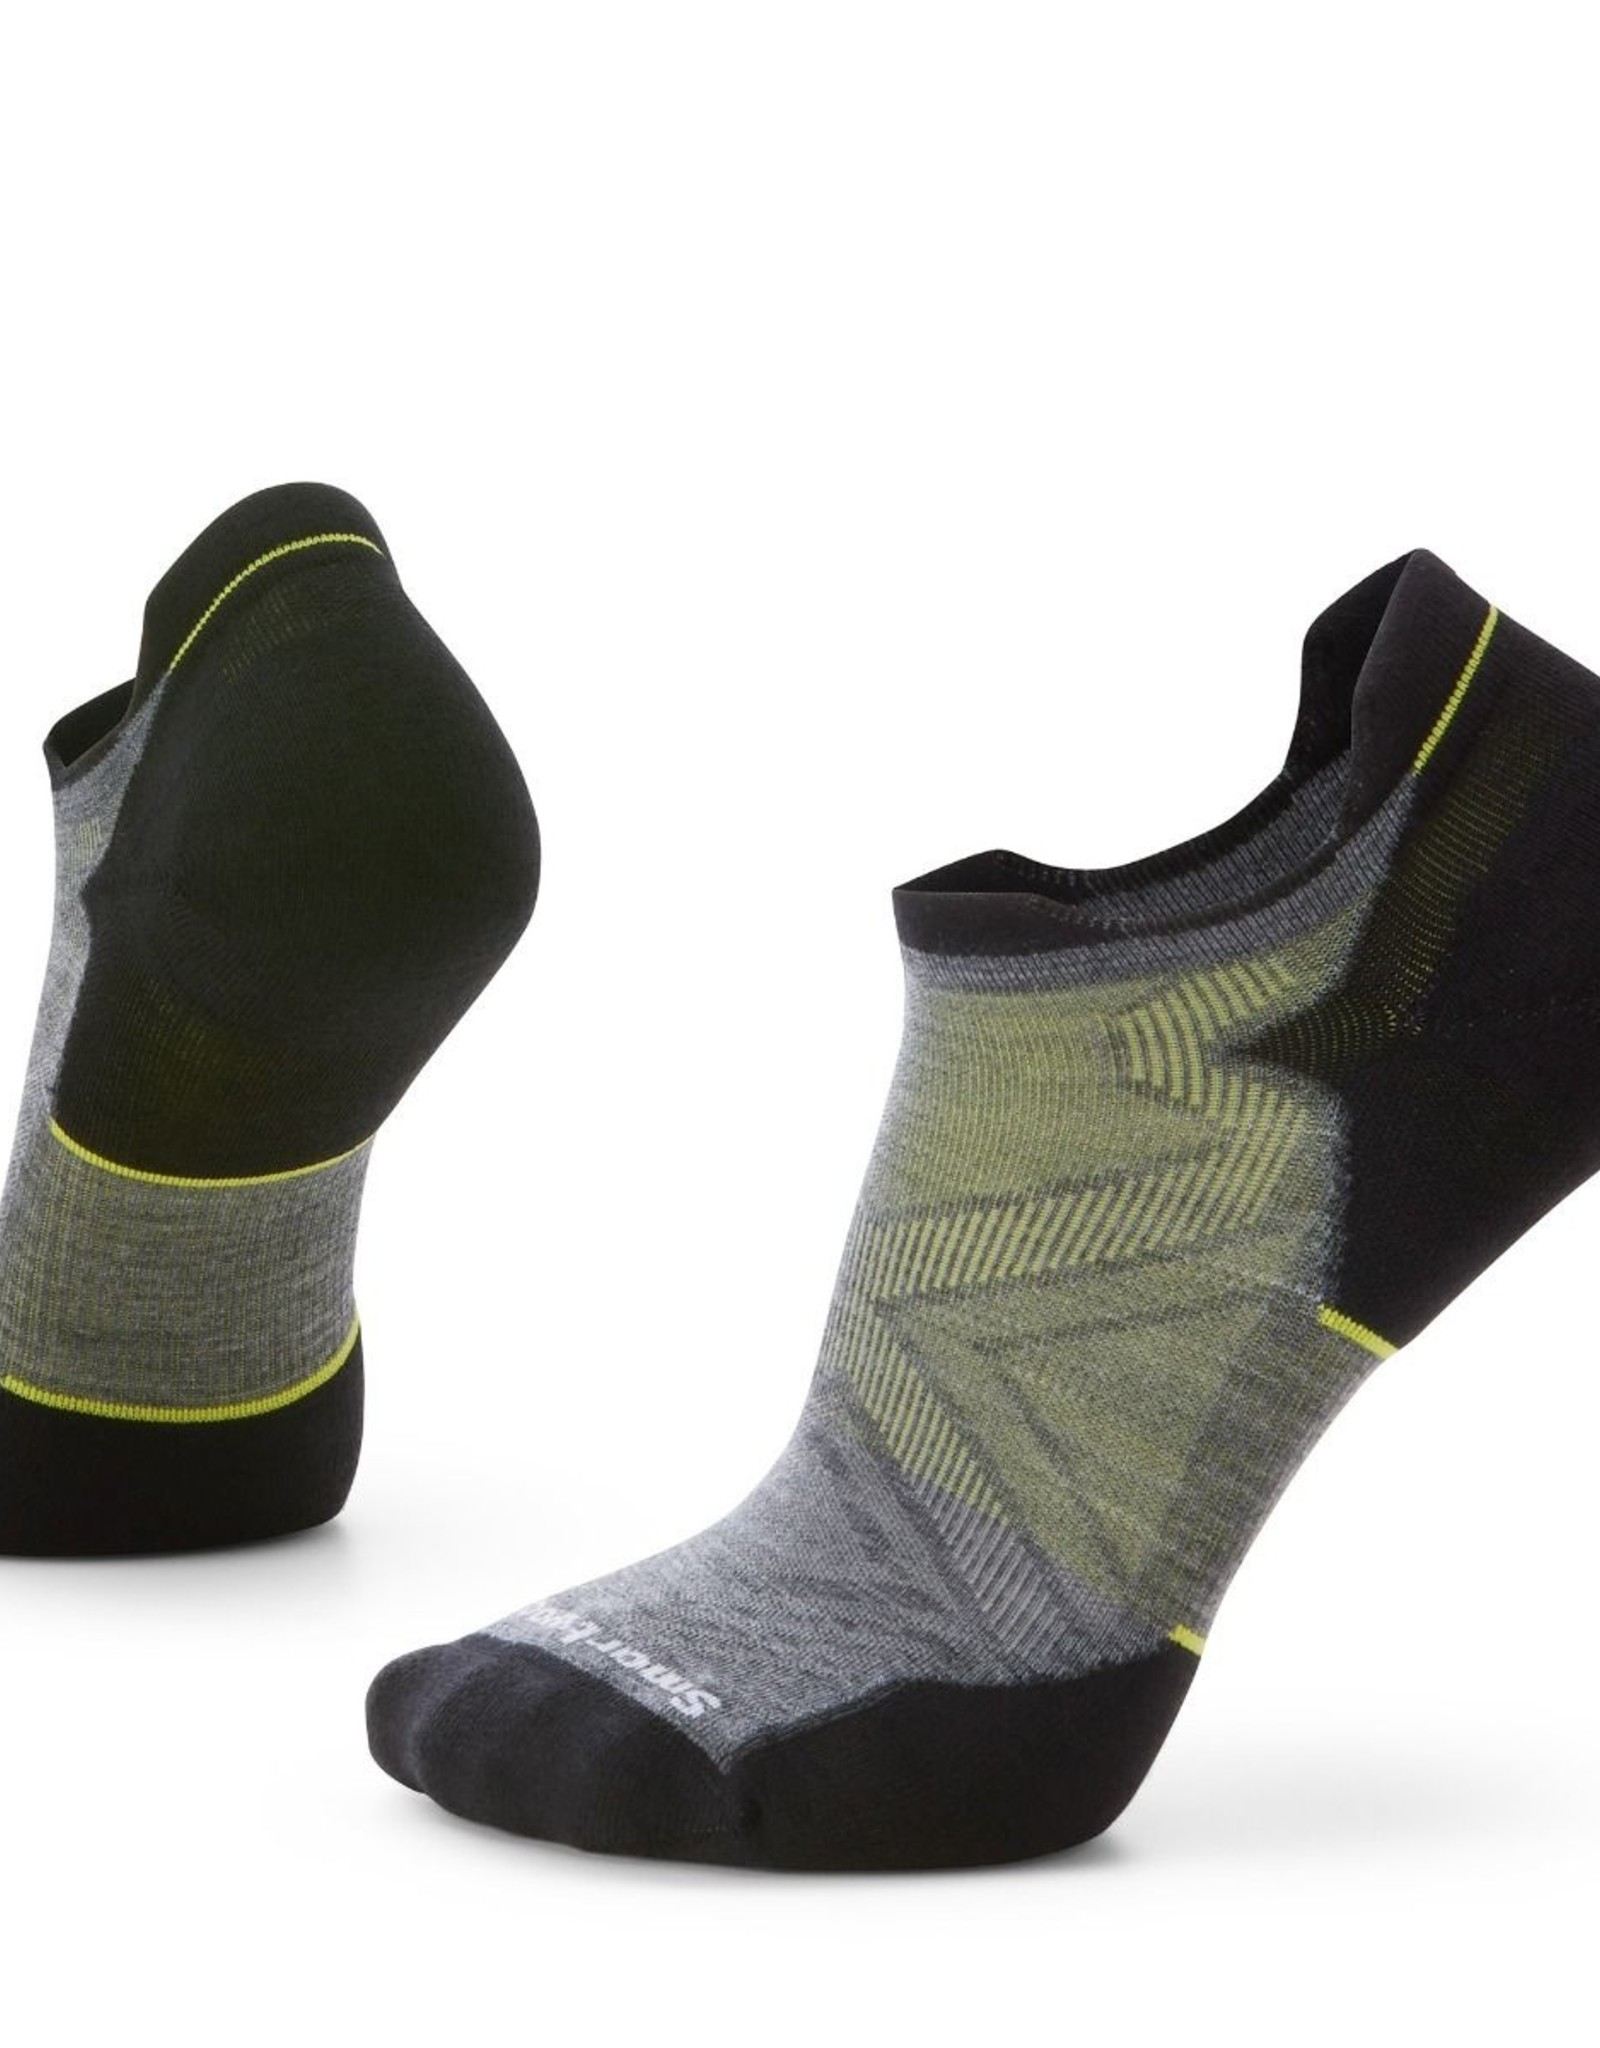 M Run Targeted Cushion Low Ankle Socks